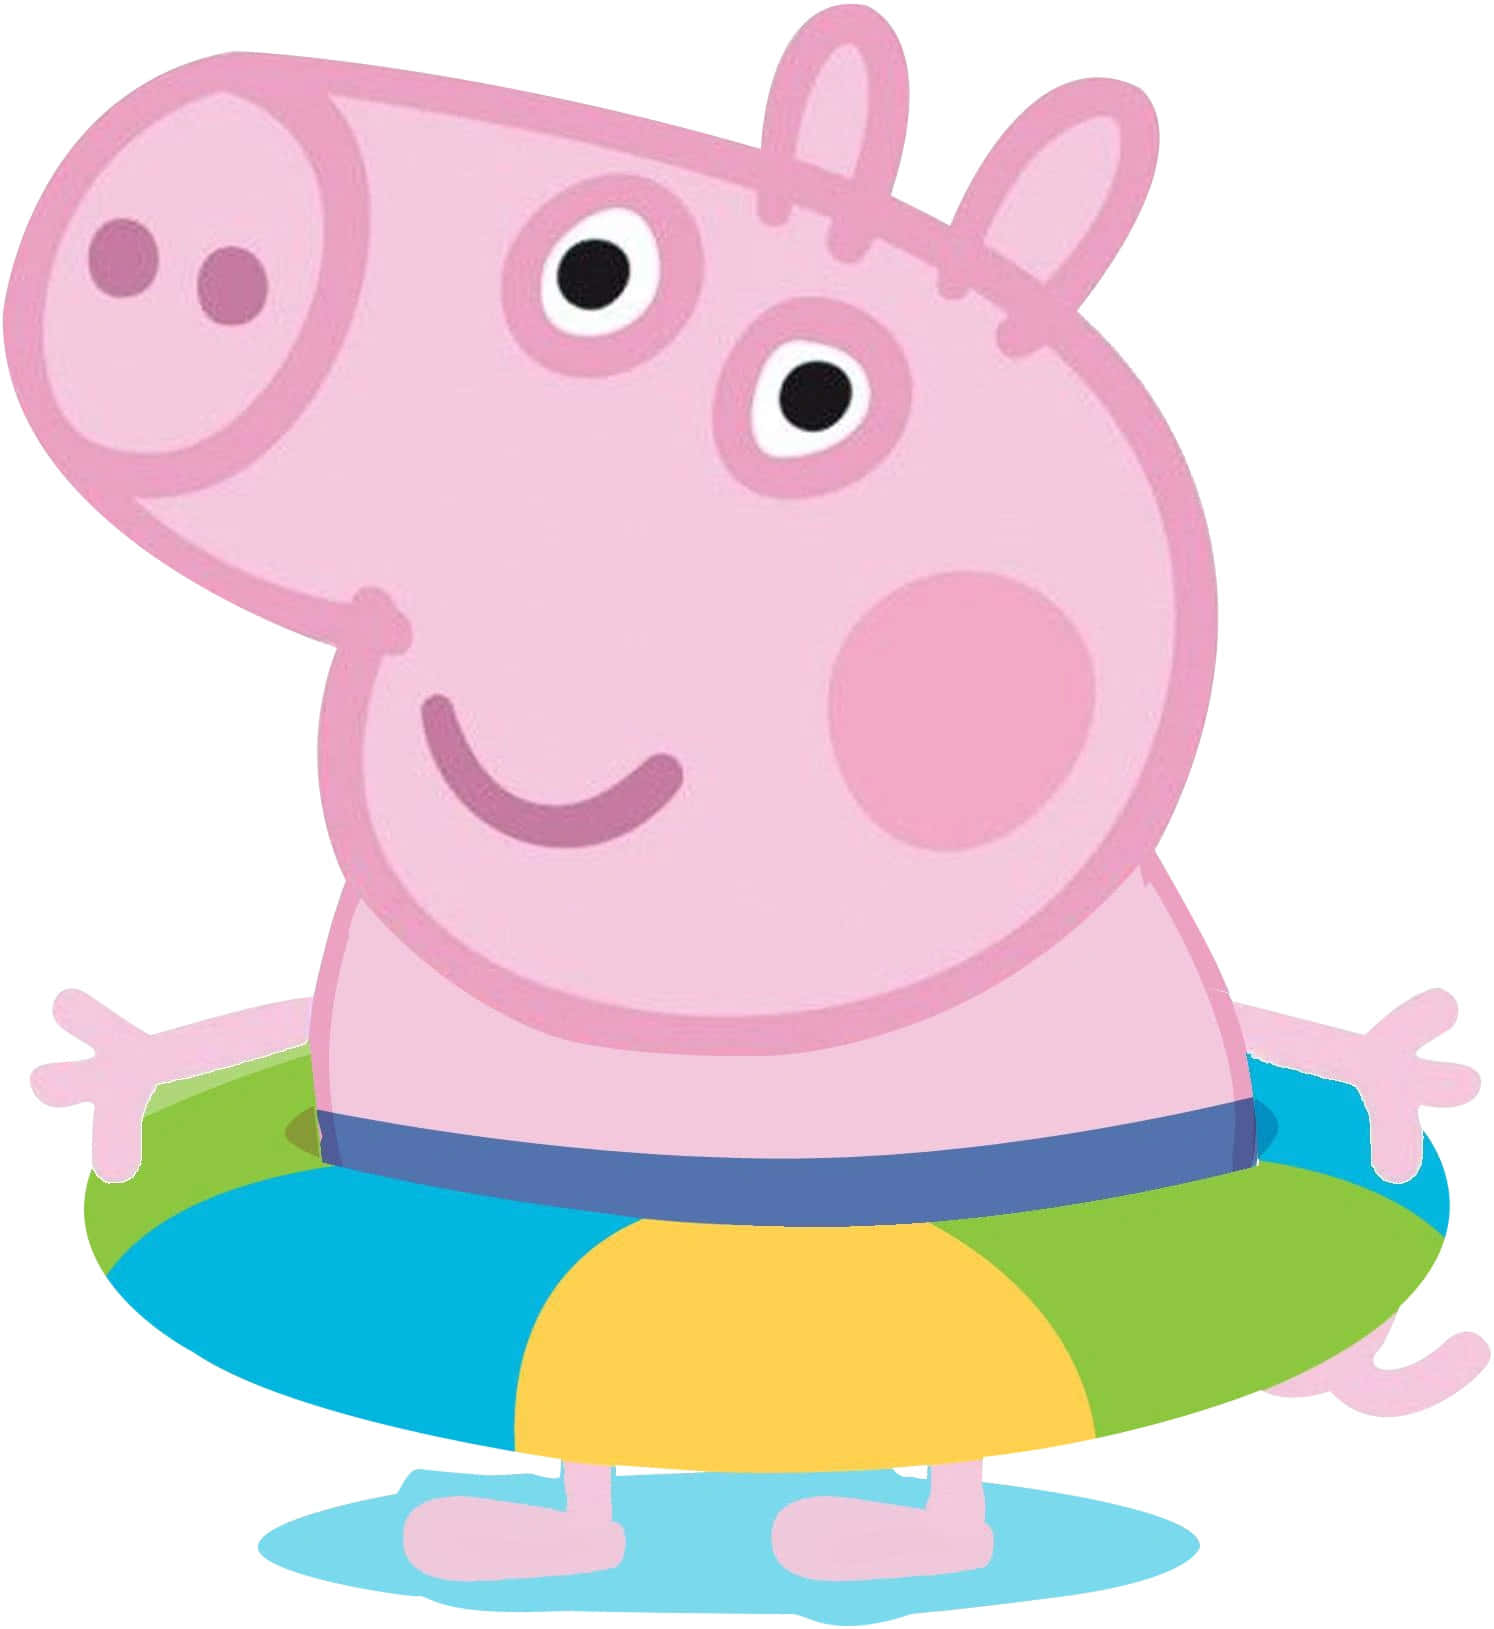 George Pig, the lovable pink pig from the popular Peppa Pig show Wallpaper